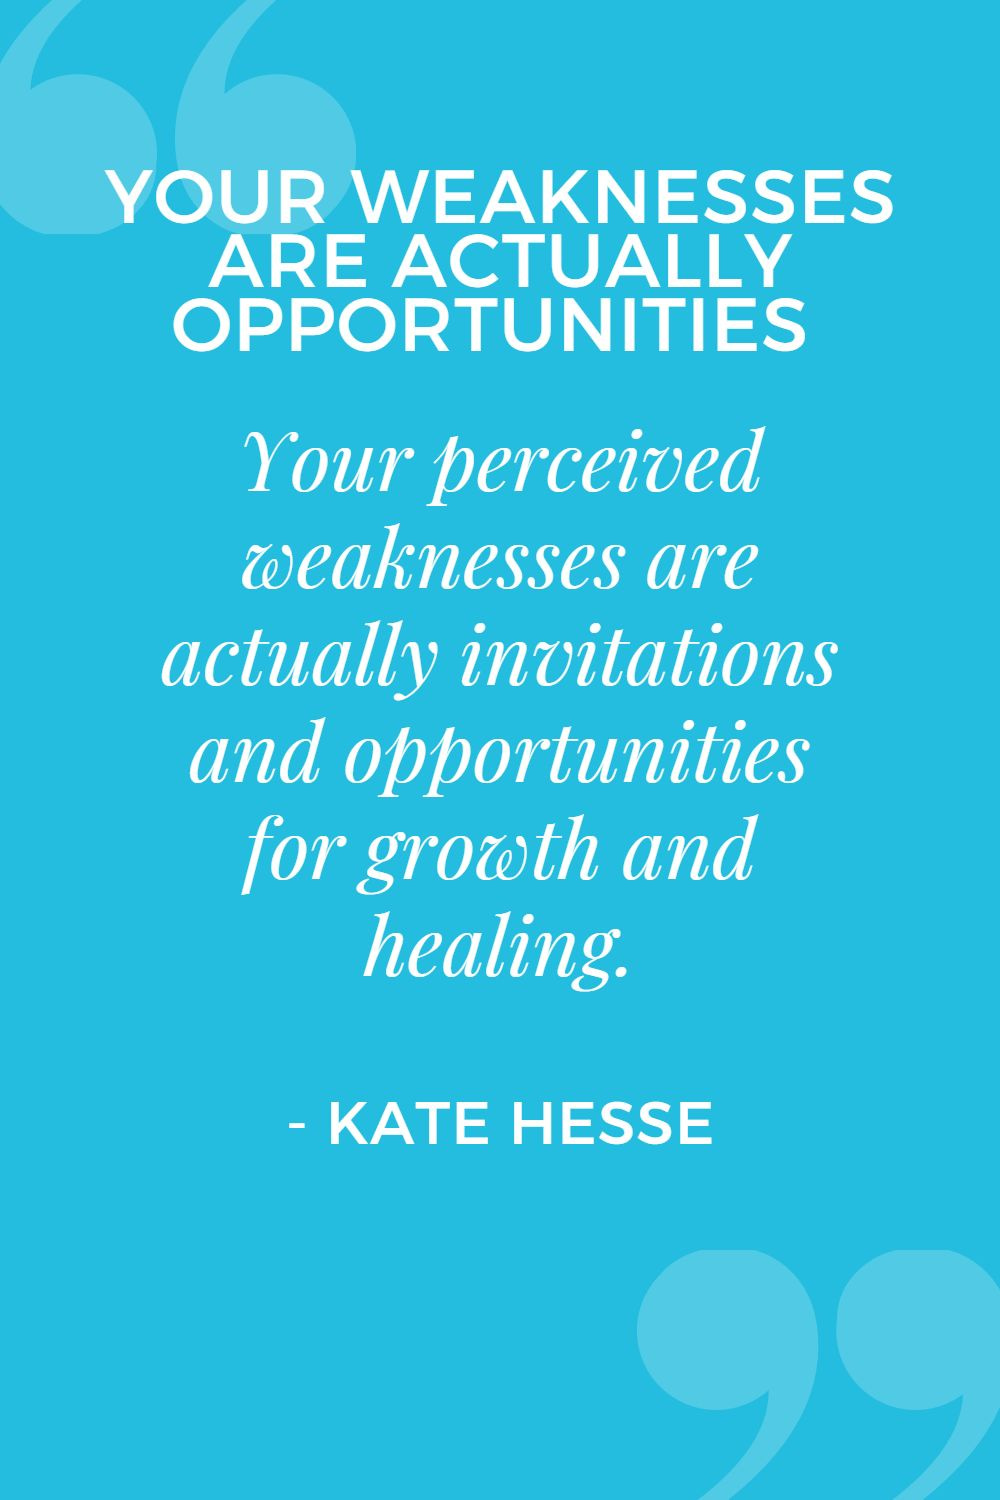 Your perceived weaknesses are actually invitations and opportunities for growth and healing.